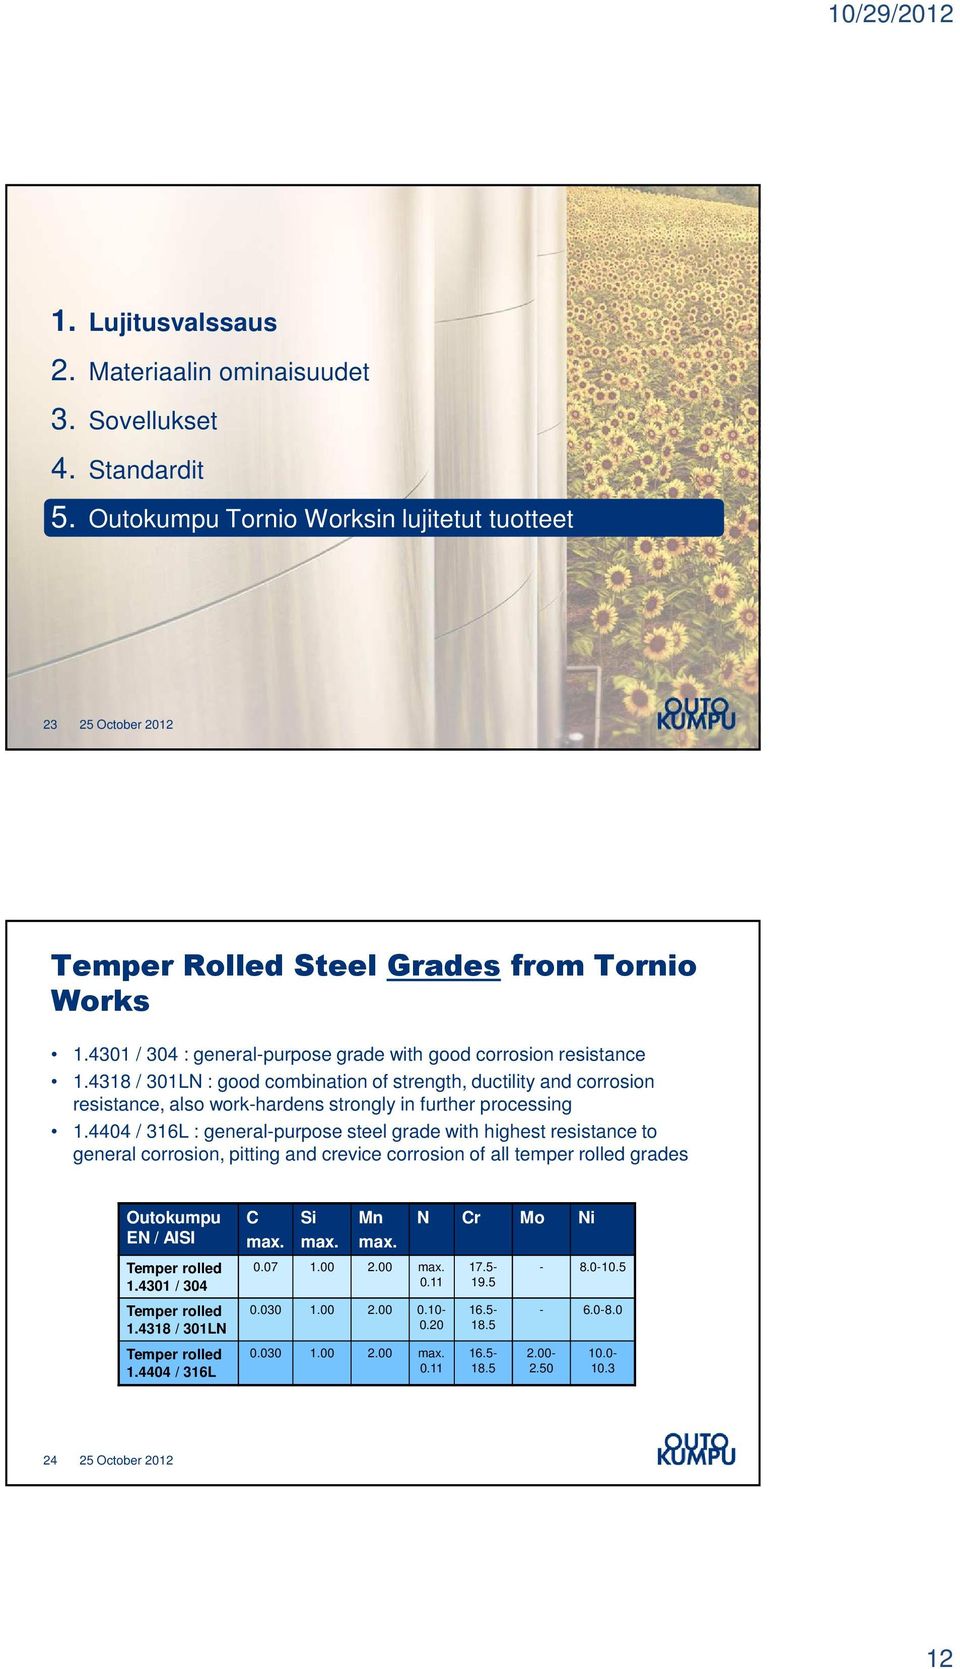 4404 / 316L : general-purpose steel grade with highest resistance to general corrosion, pitting and crevice corrosion of all temper rolled grades Outokumpu EN / AISI Temper rolled 1.